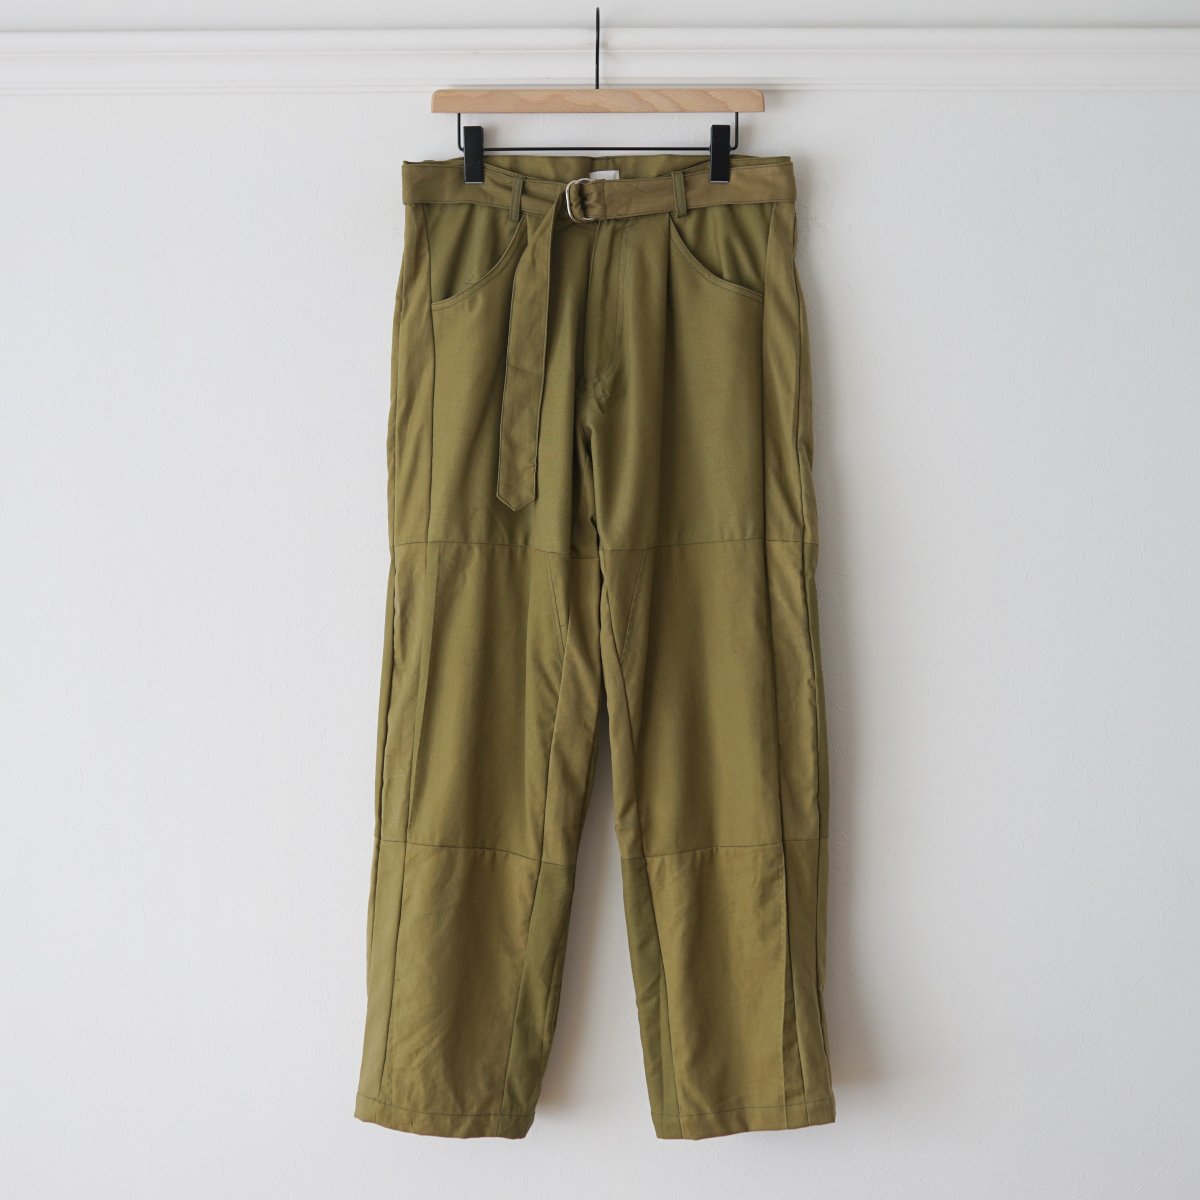 【SEEALL シーオール】 RECONSTRUCTED BELTED BUGGY PANTS - MILITARY